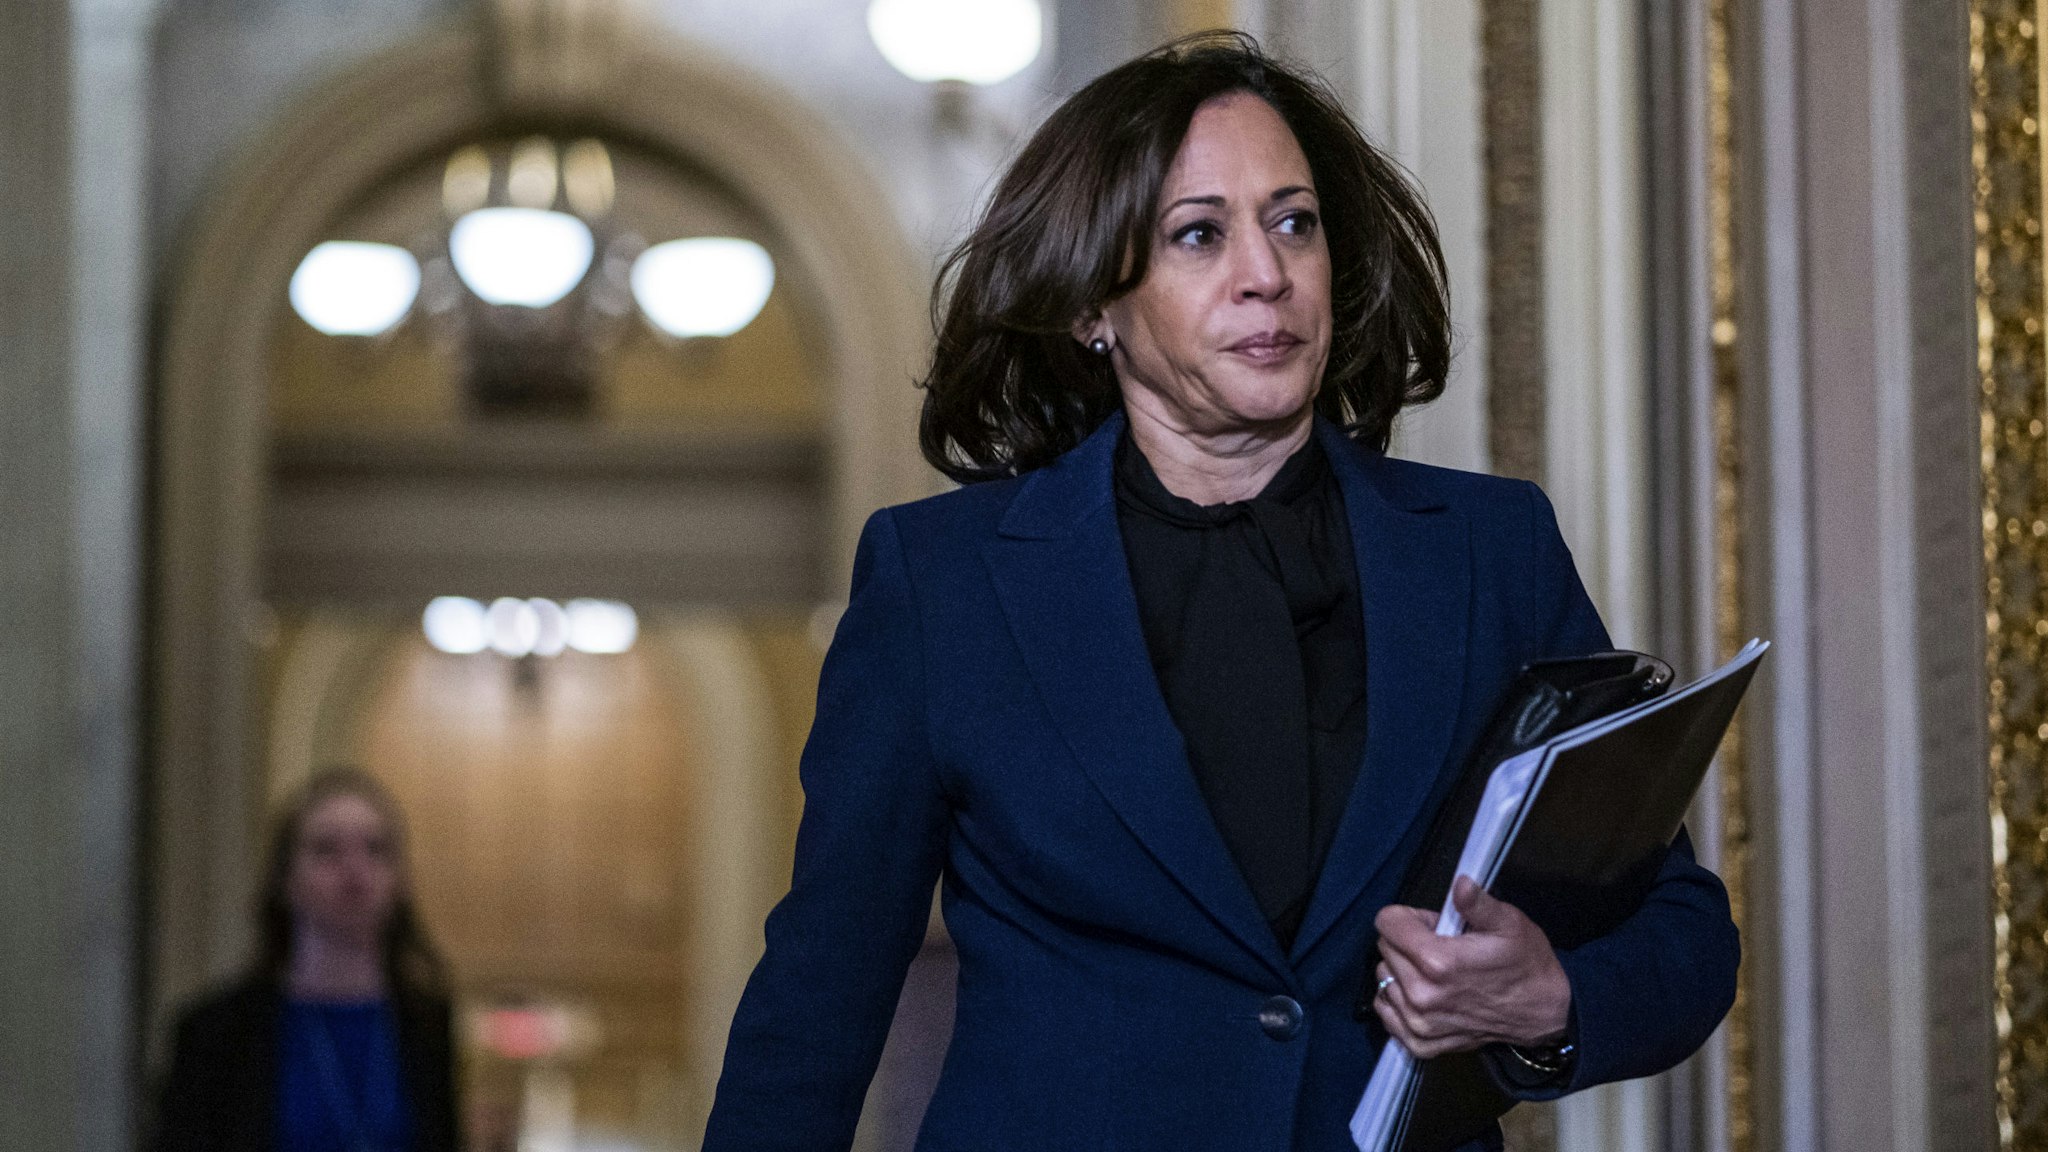 WASHINGTON, DC - JANUARY 31: Sen. Kamala Harris (D-CA) walks near the Senate Chamber during a recess in the Senate impeachment trial of U.S. President Donald Trump at the U.S. Capitol on January 31, 2020 in Washington, DC. On Friday, Senators are expected to debate and then vote on whether to include additional witnesses and documents. (Photo by Zach Gibson/Getty Images)